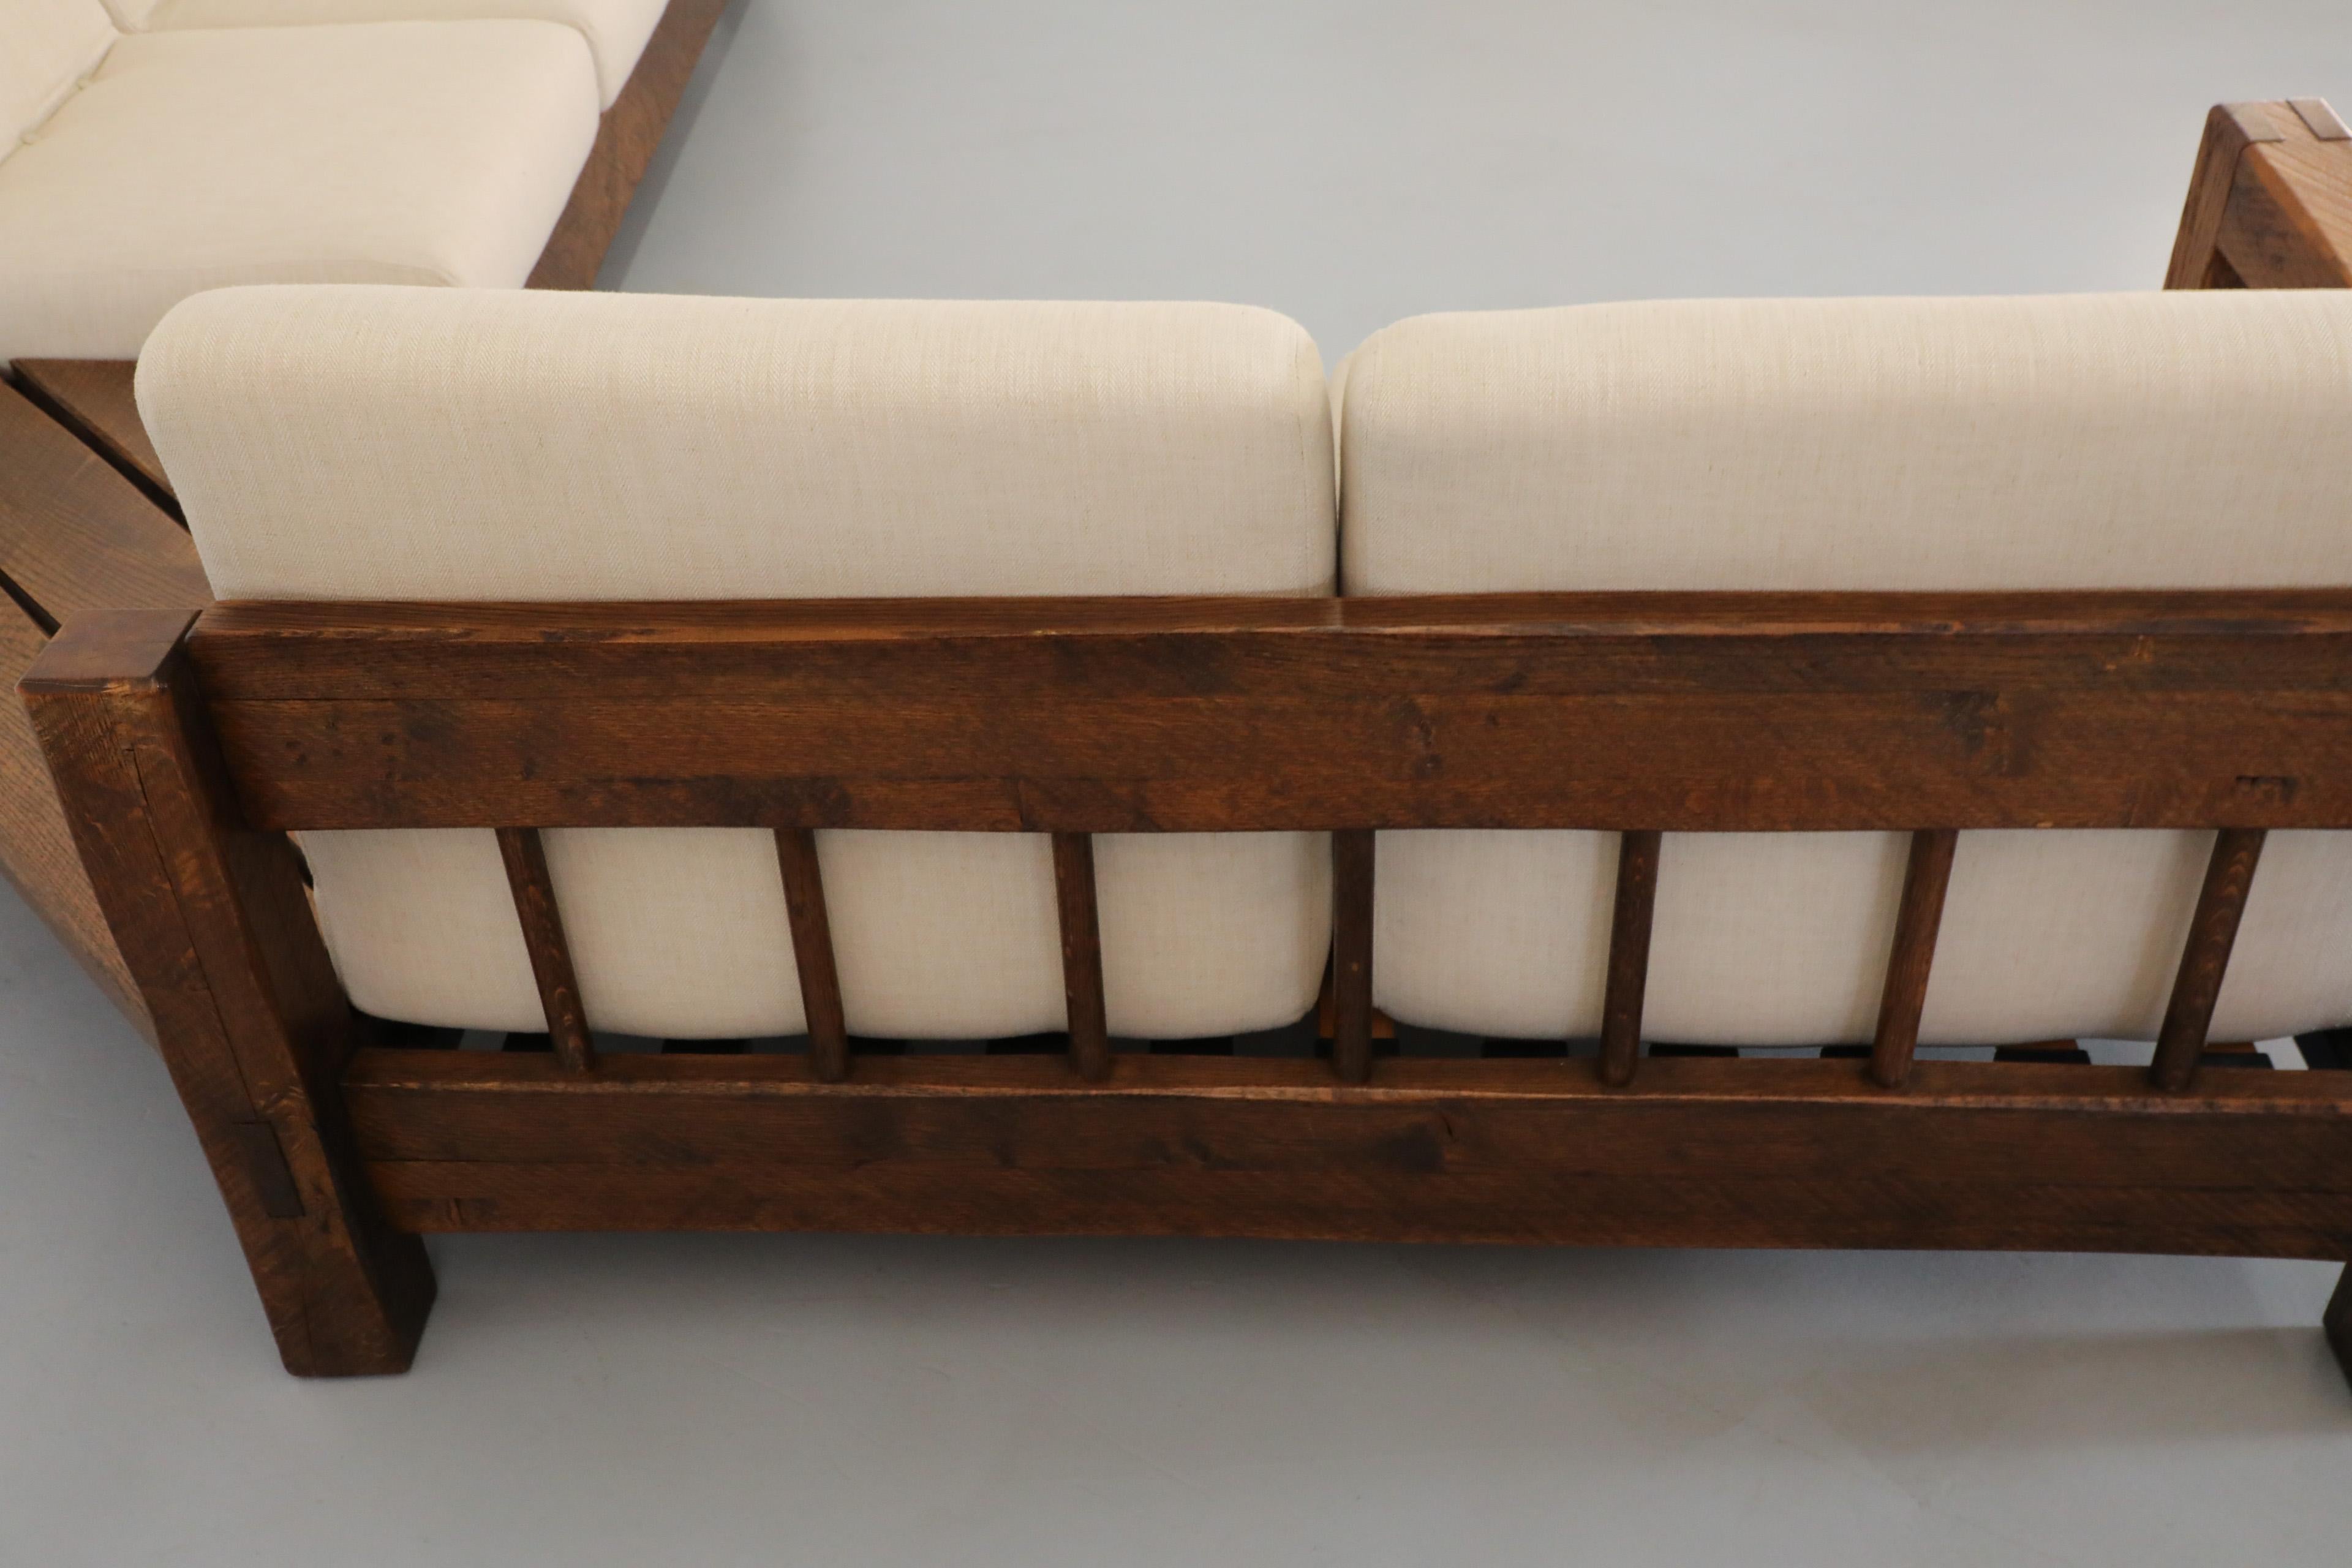 Pierre Chapo Inspired Oak Brutalist Sectional Sofa w/ Built In Corner Table For Sale 3